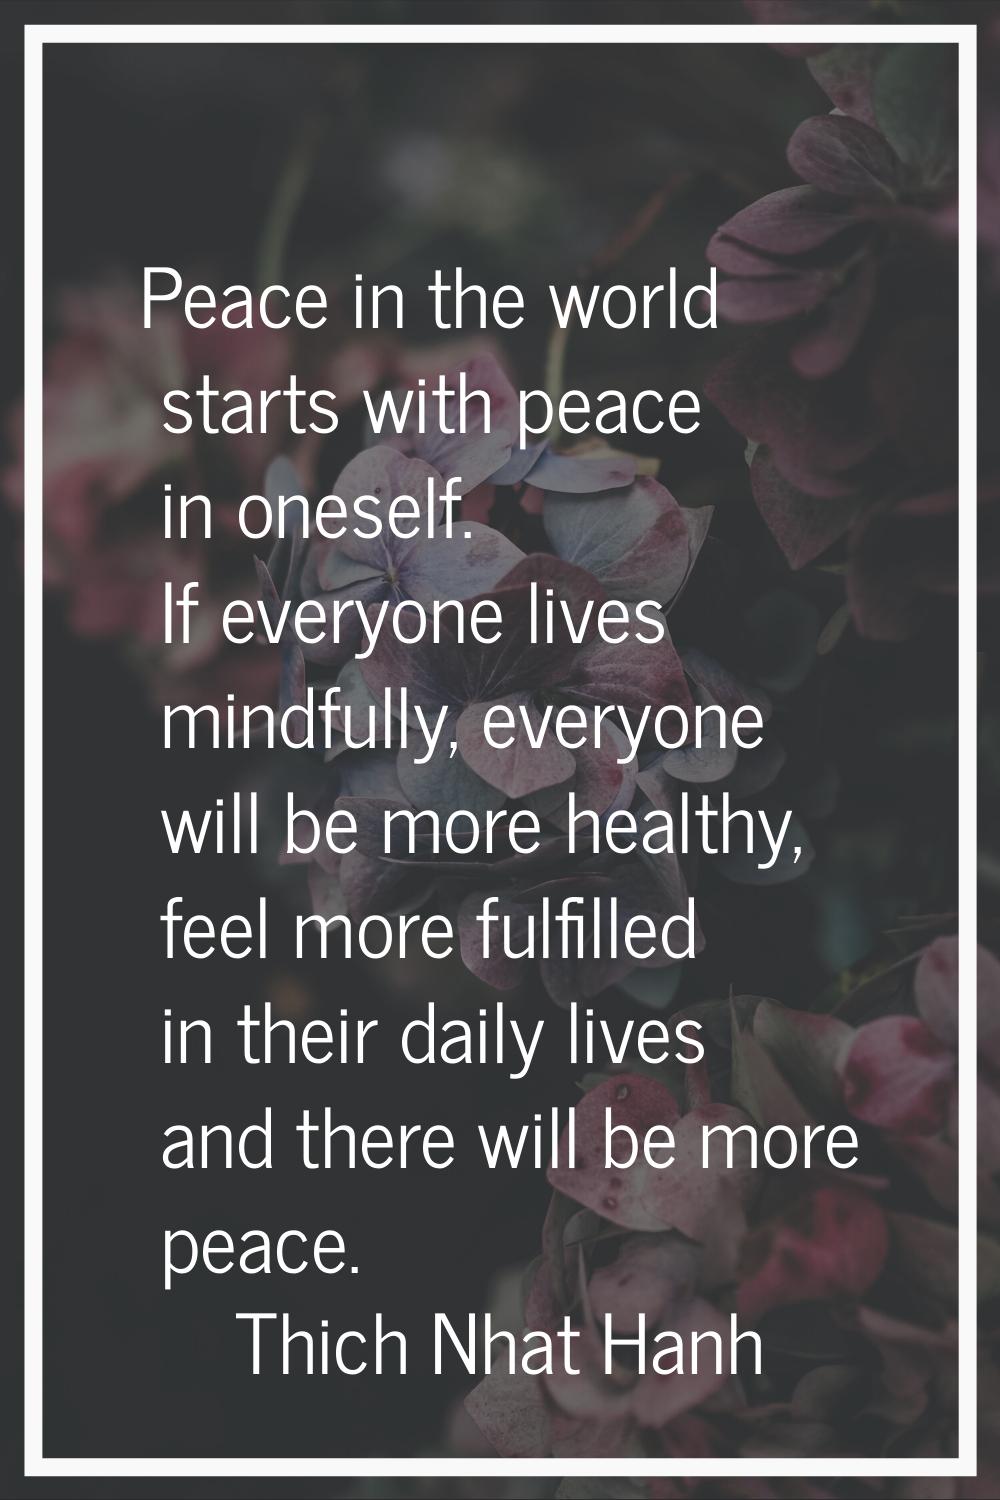 Peace in the world starts with peace in oneself. If everyone lives mindfully, everyone will be more